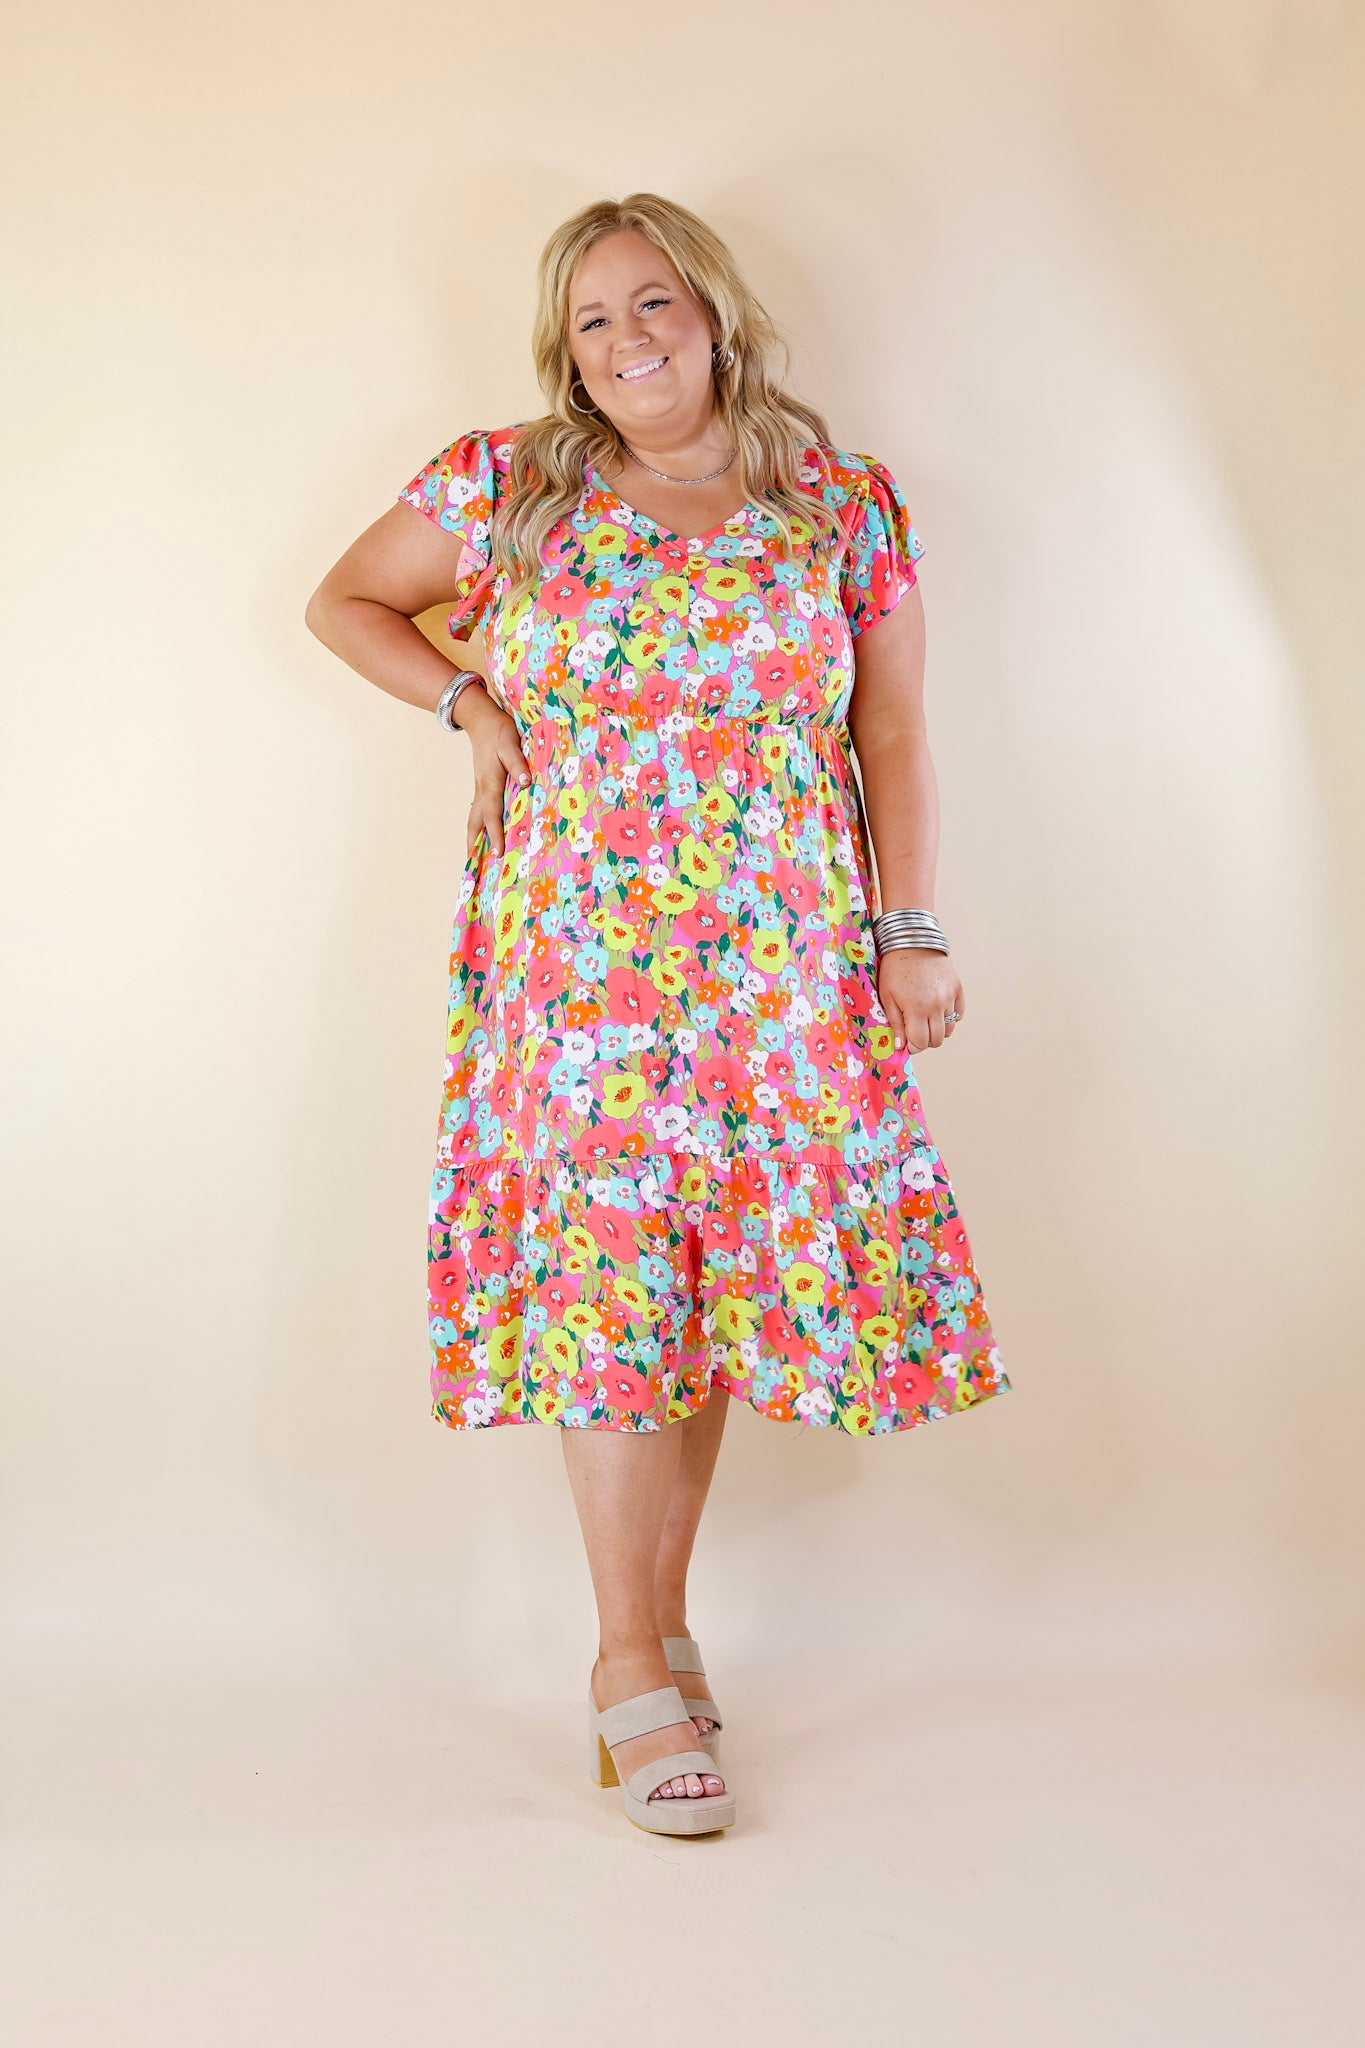 Coastal Charisma Floral Midi Dress with Ruffle Cap Sleeves in Pink Mix - Giddy Up Glamour Boutique